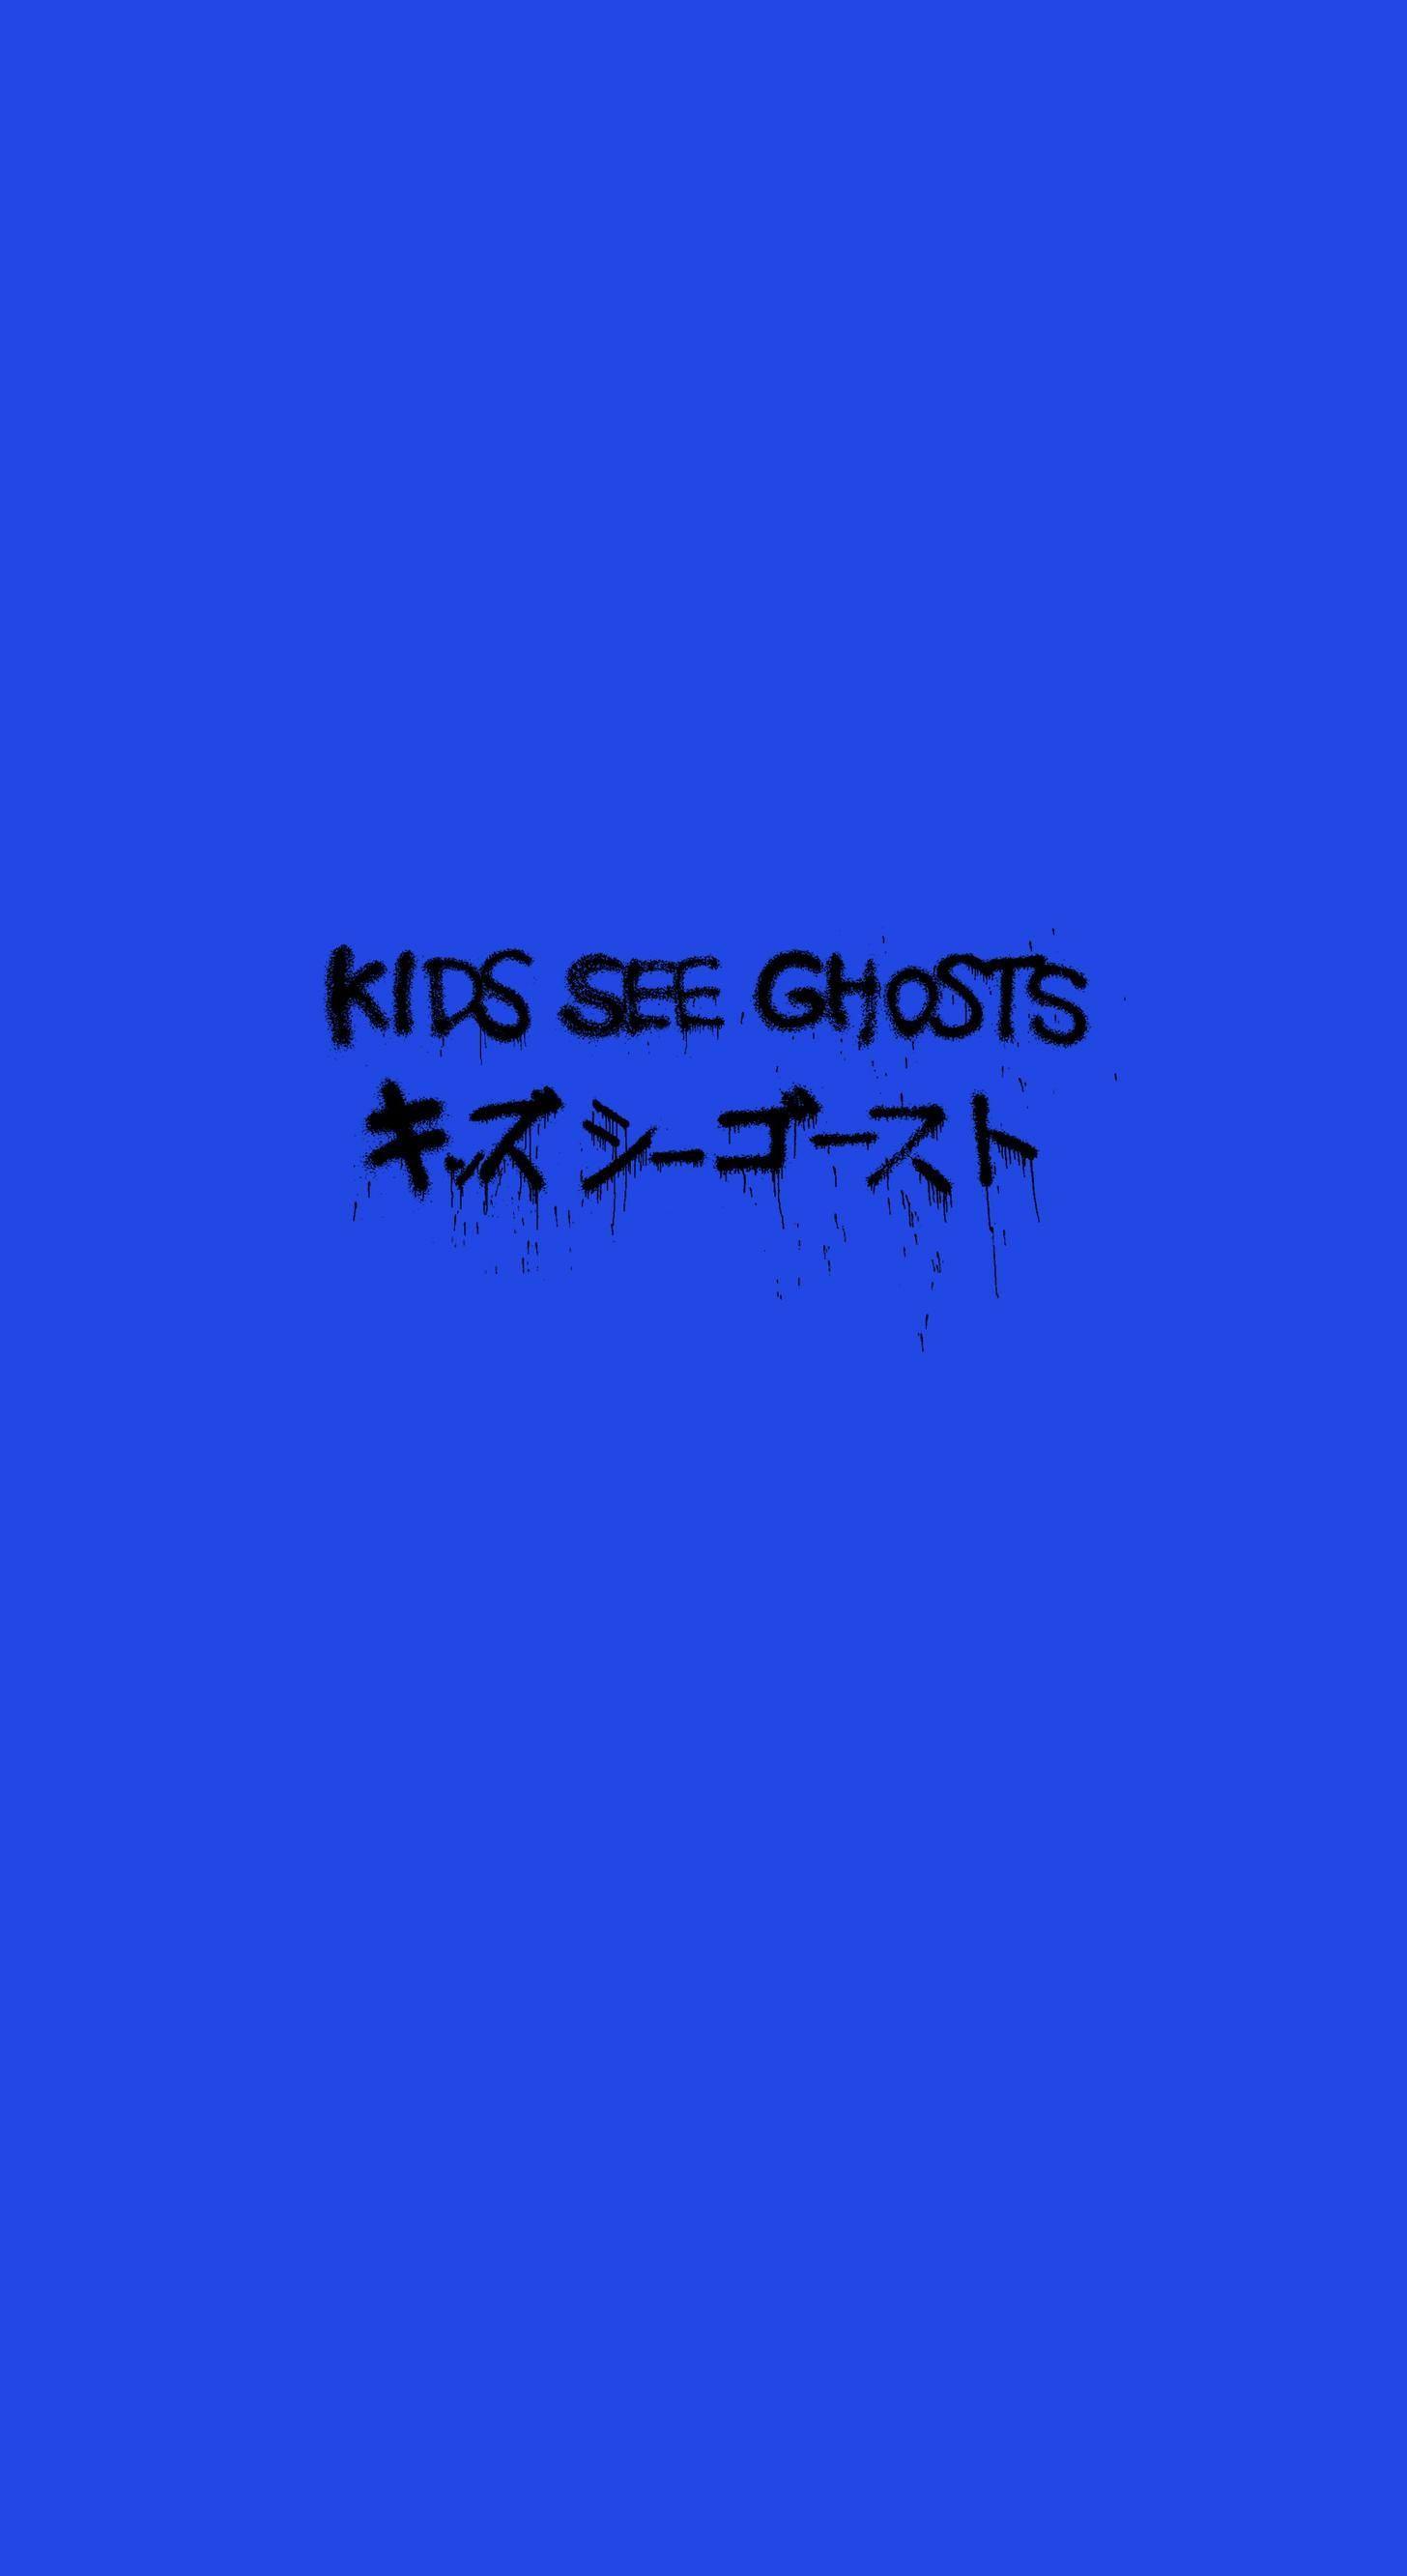 Kids See Ghosts Kanye iPhone Wallpaper. Kanye All Day